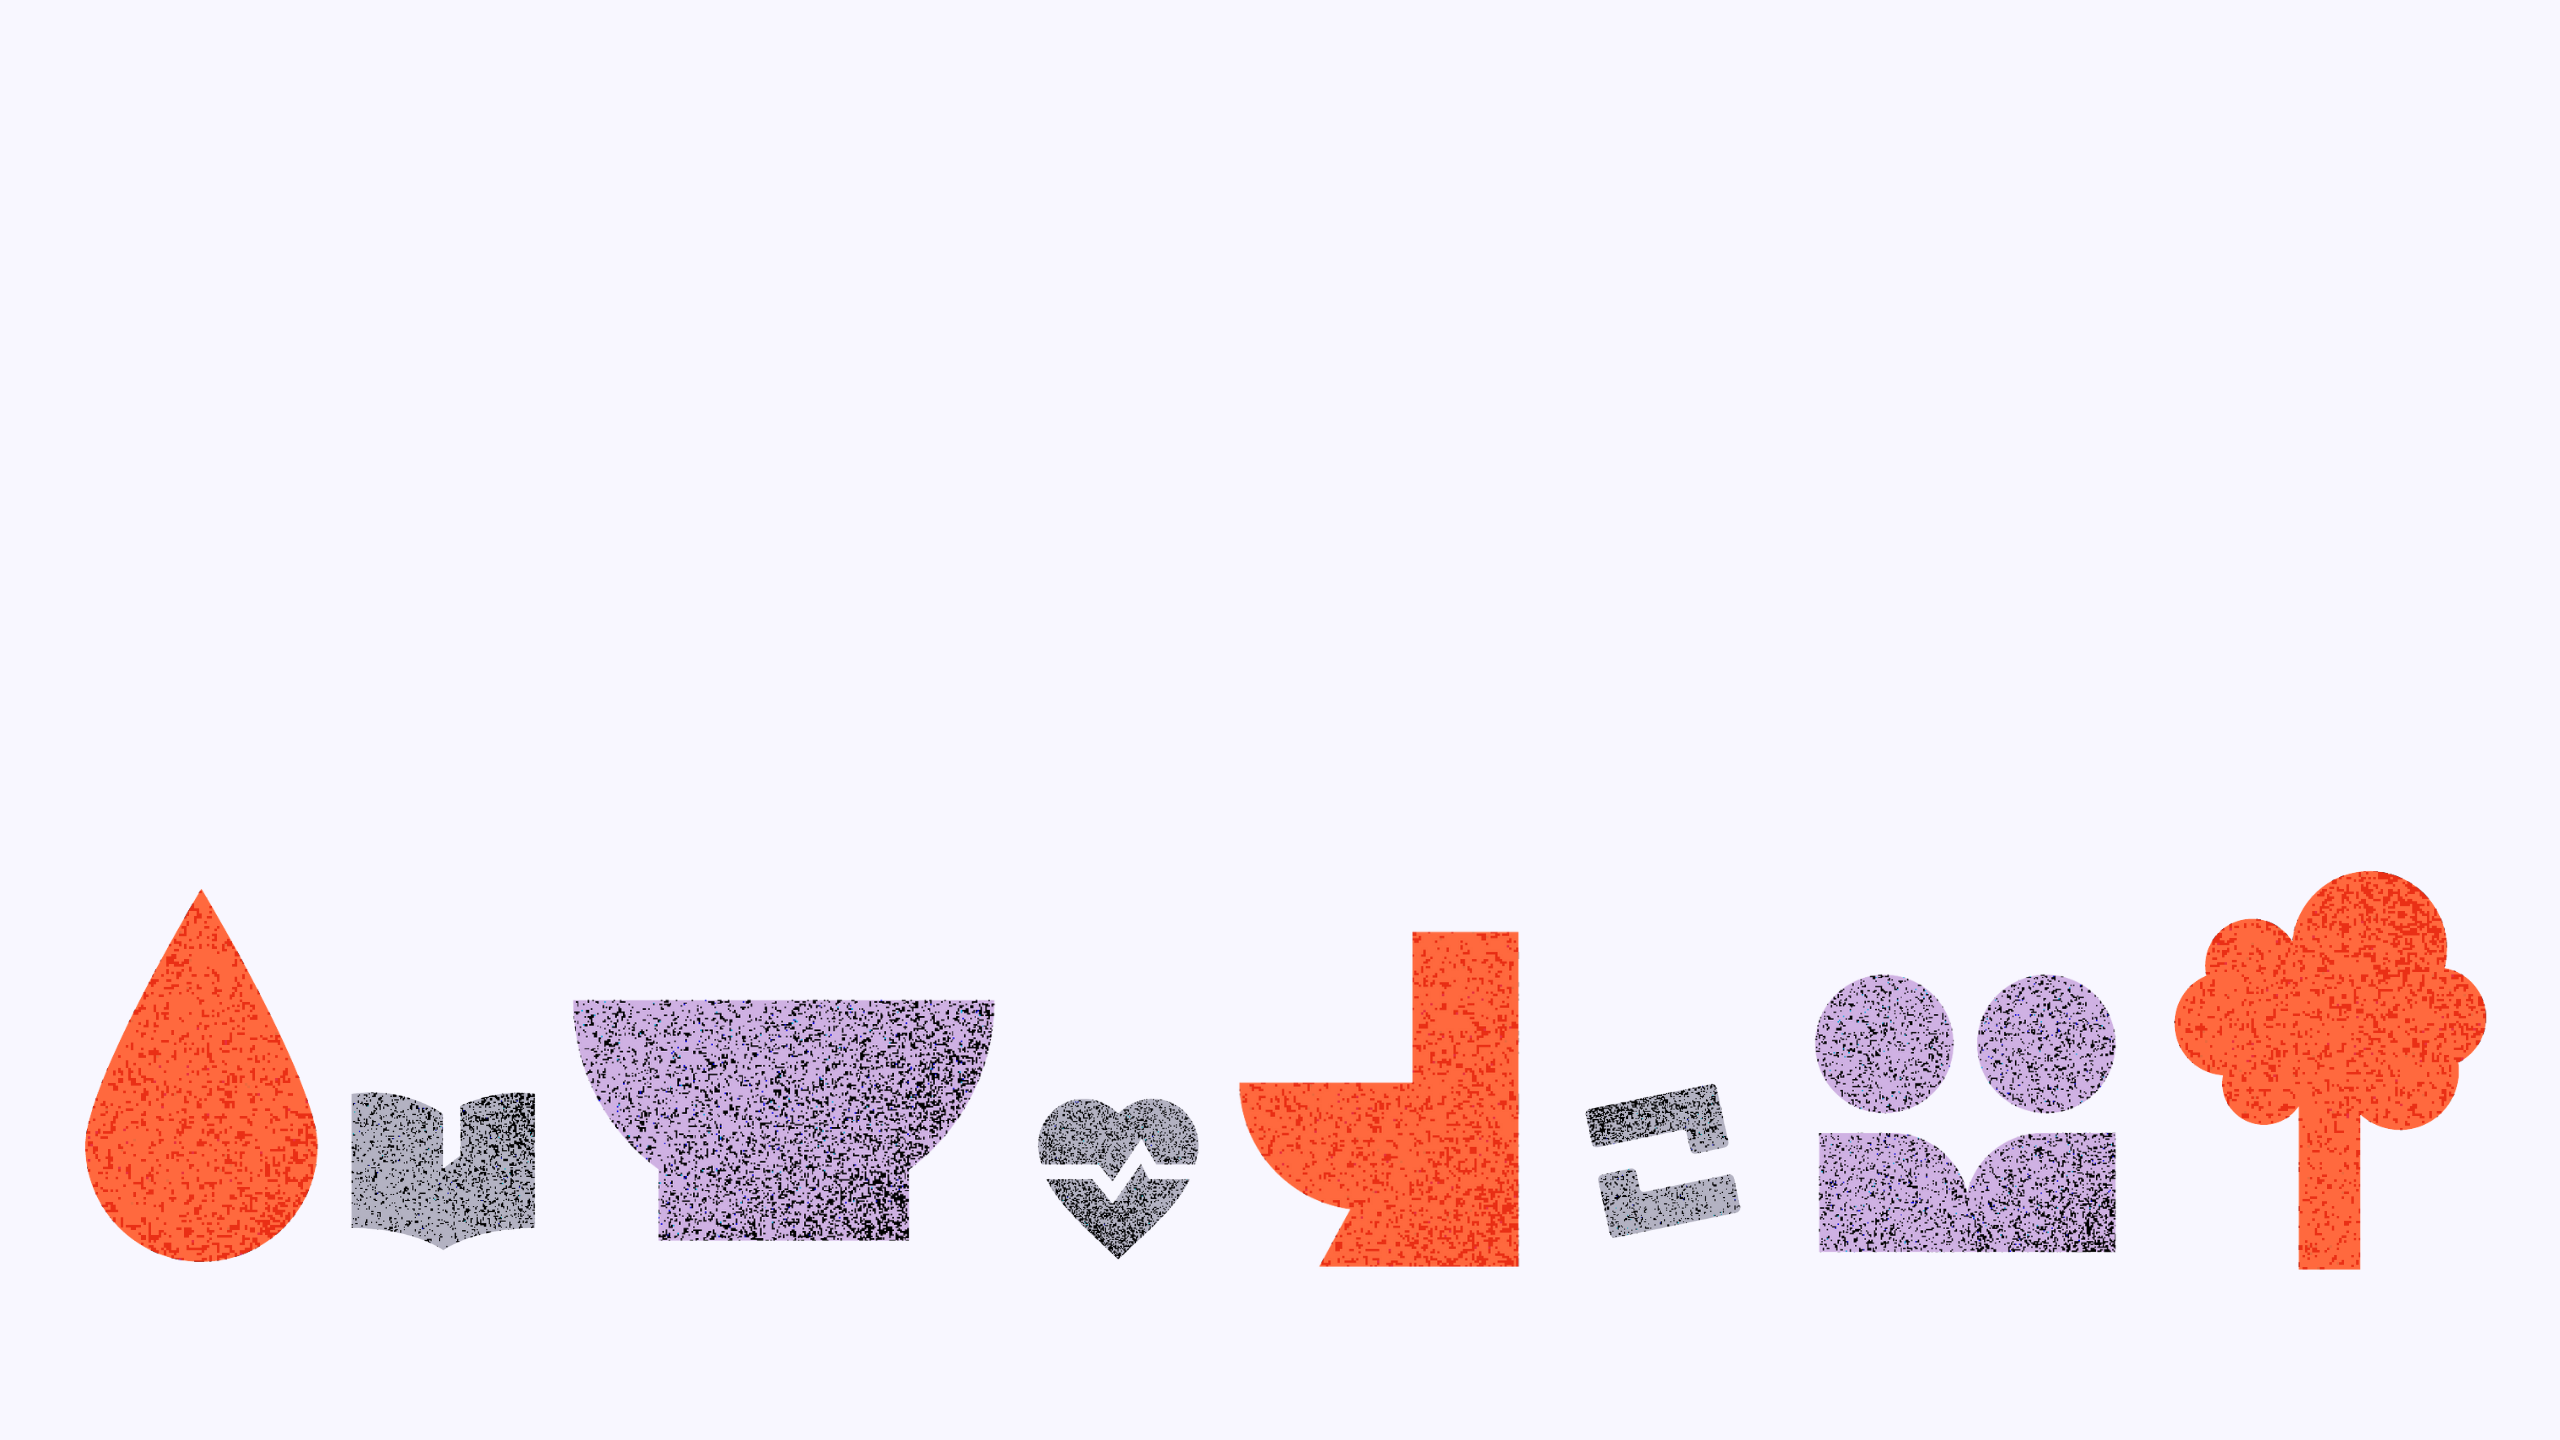 Orange, grey and purple icons to represent the 15 dimensions that Equality Insights measures including food, water, shelter, health, education, energy, sanitation, relationships, clothing, safety, family planning, environment, voice, time-use and work.